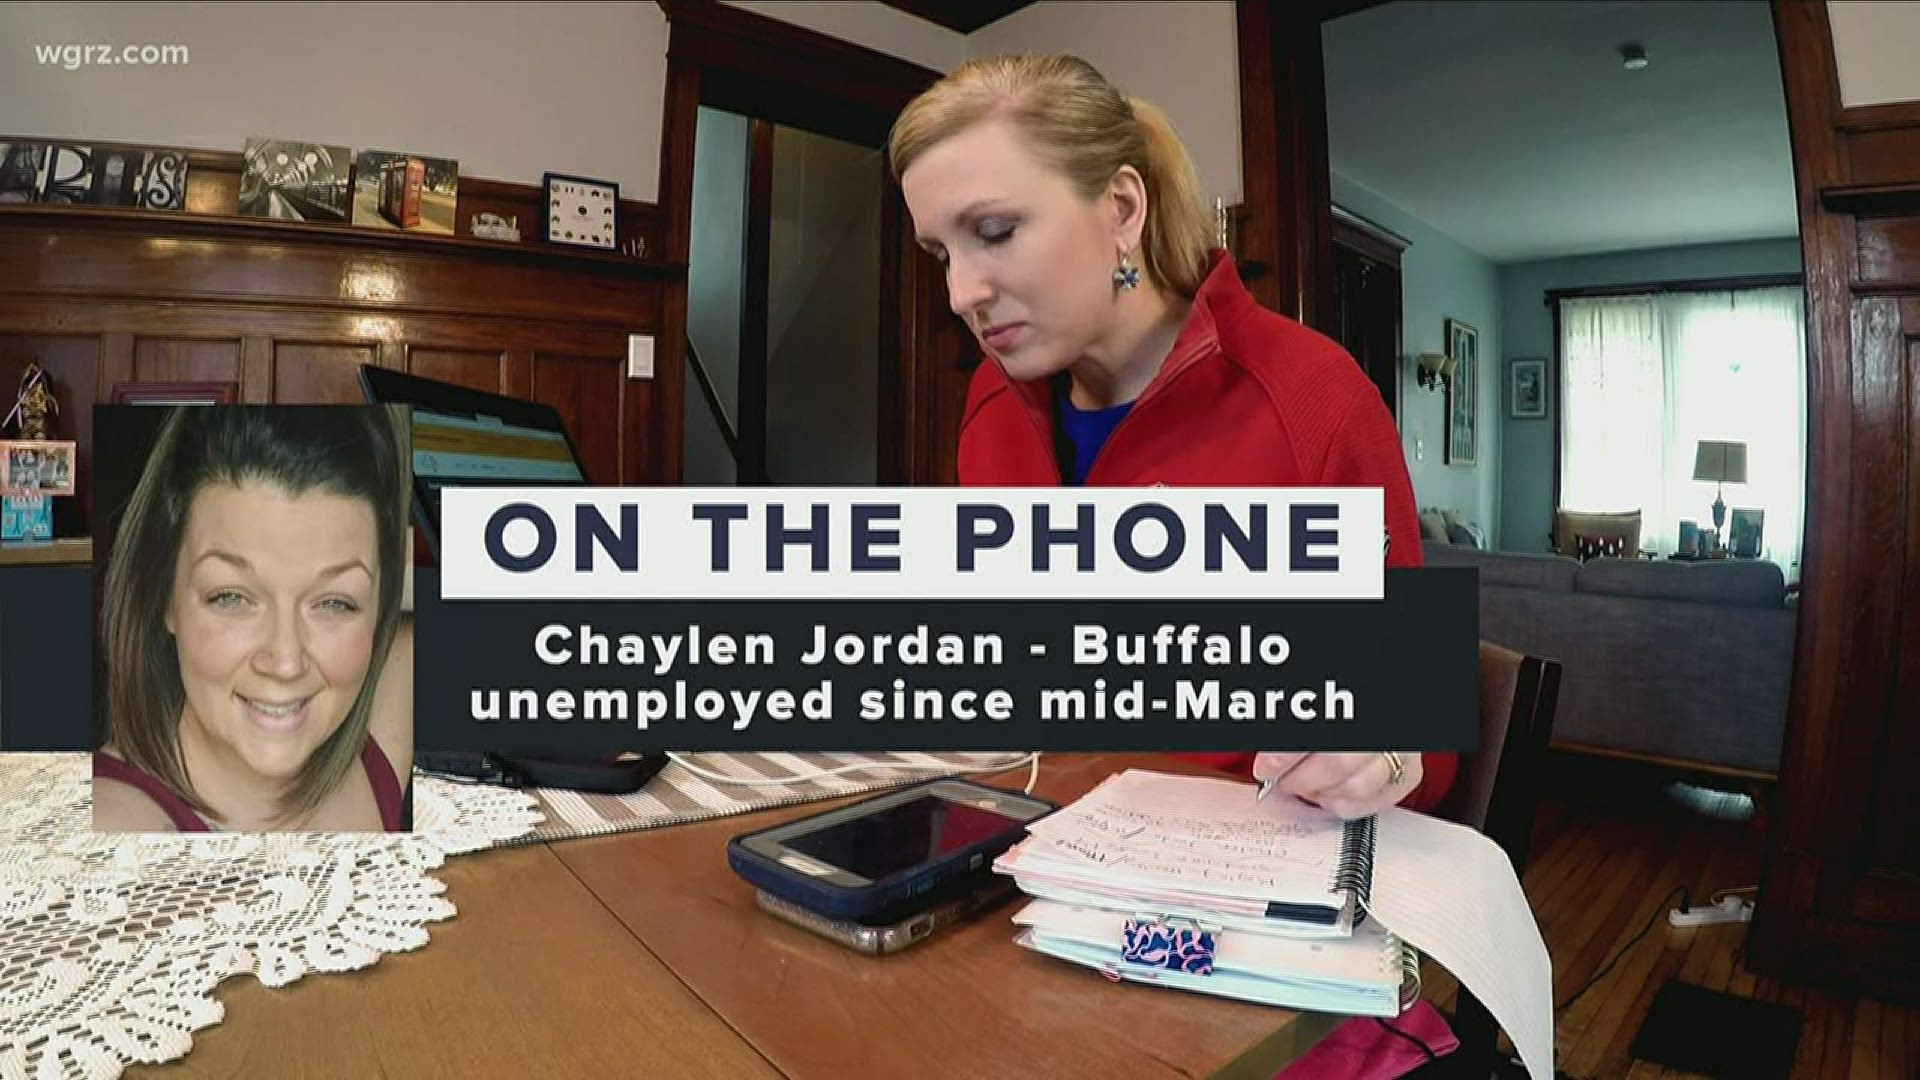 Chalen Jordan is running out of money and has been out of work since Mid-March.